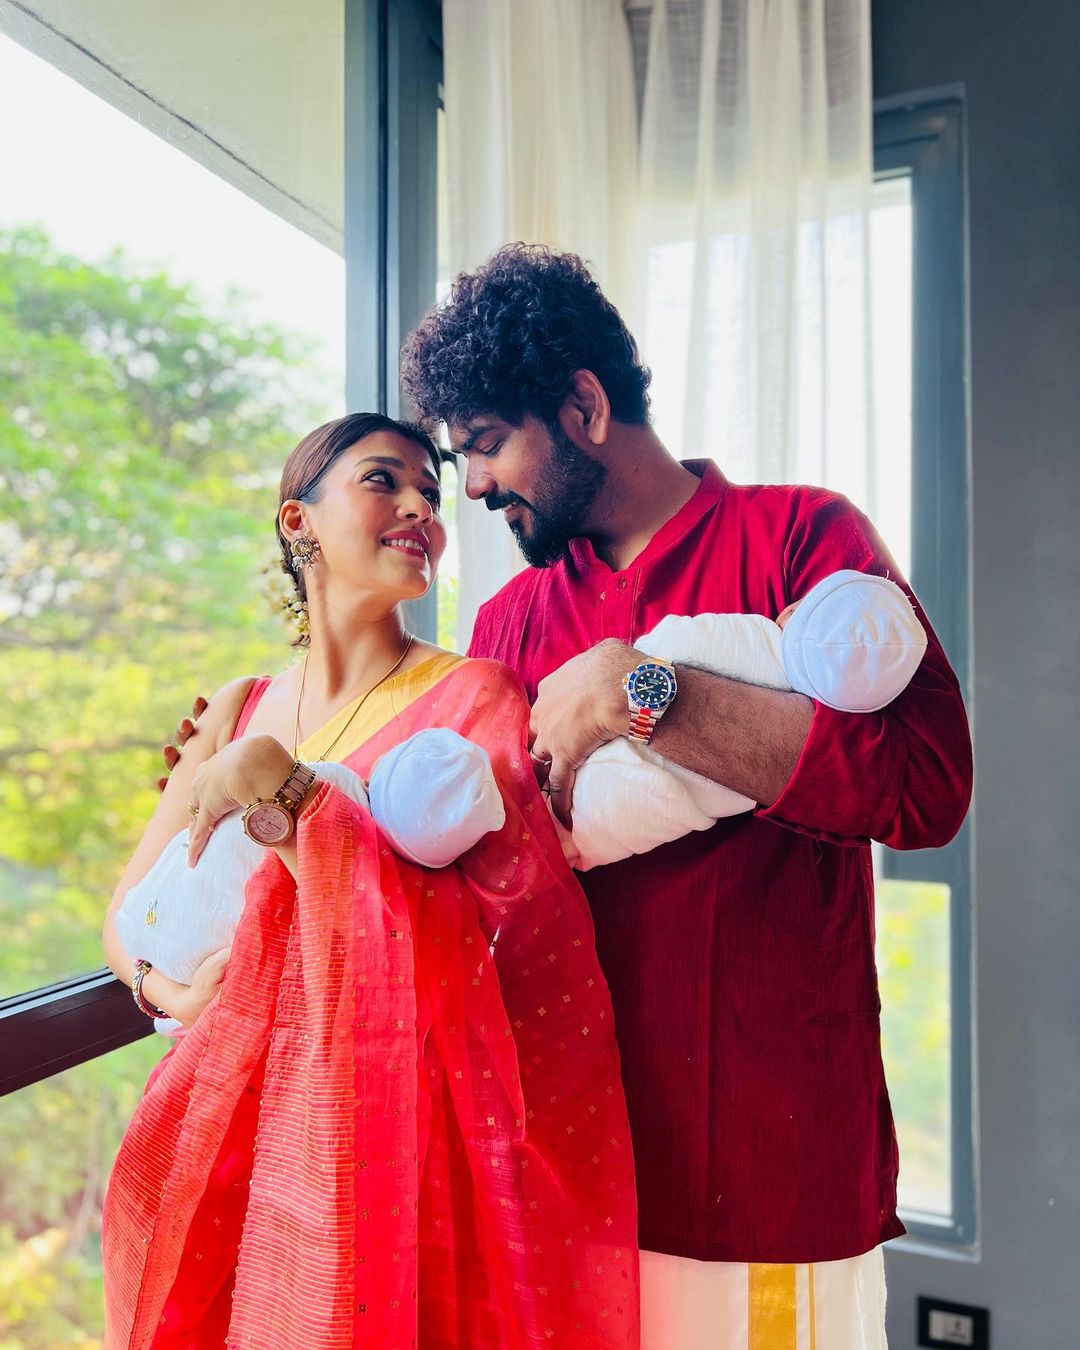 vignesh shivan and nayanthara celebrated diwali this year with their twin babies